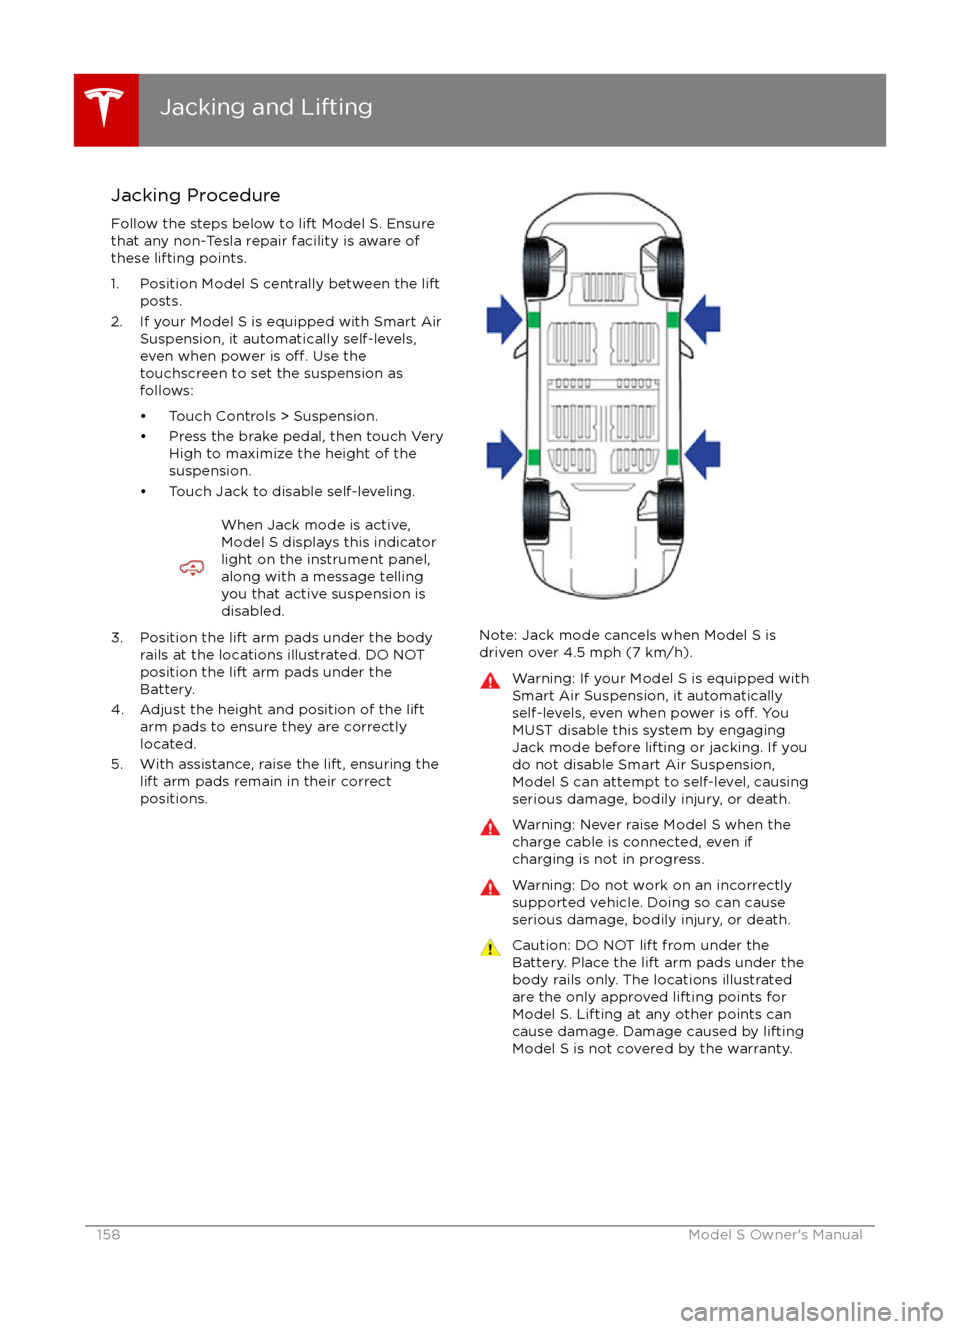 TESLA MODEL S 2016  Owners Manual Jacking Procedure
Follow the steps below to lift Model S. Ensure
that any non-Tesla repair facility is aware of
these lifting points.
1. Position Model S centrally between the lift posts.
2. If your M